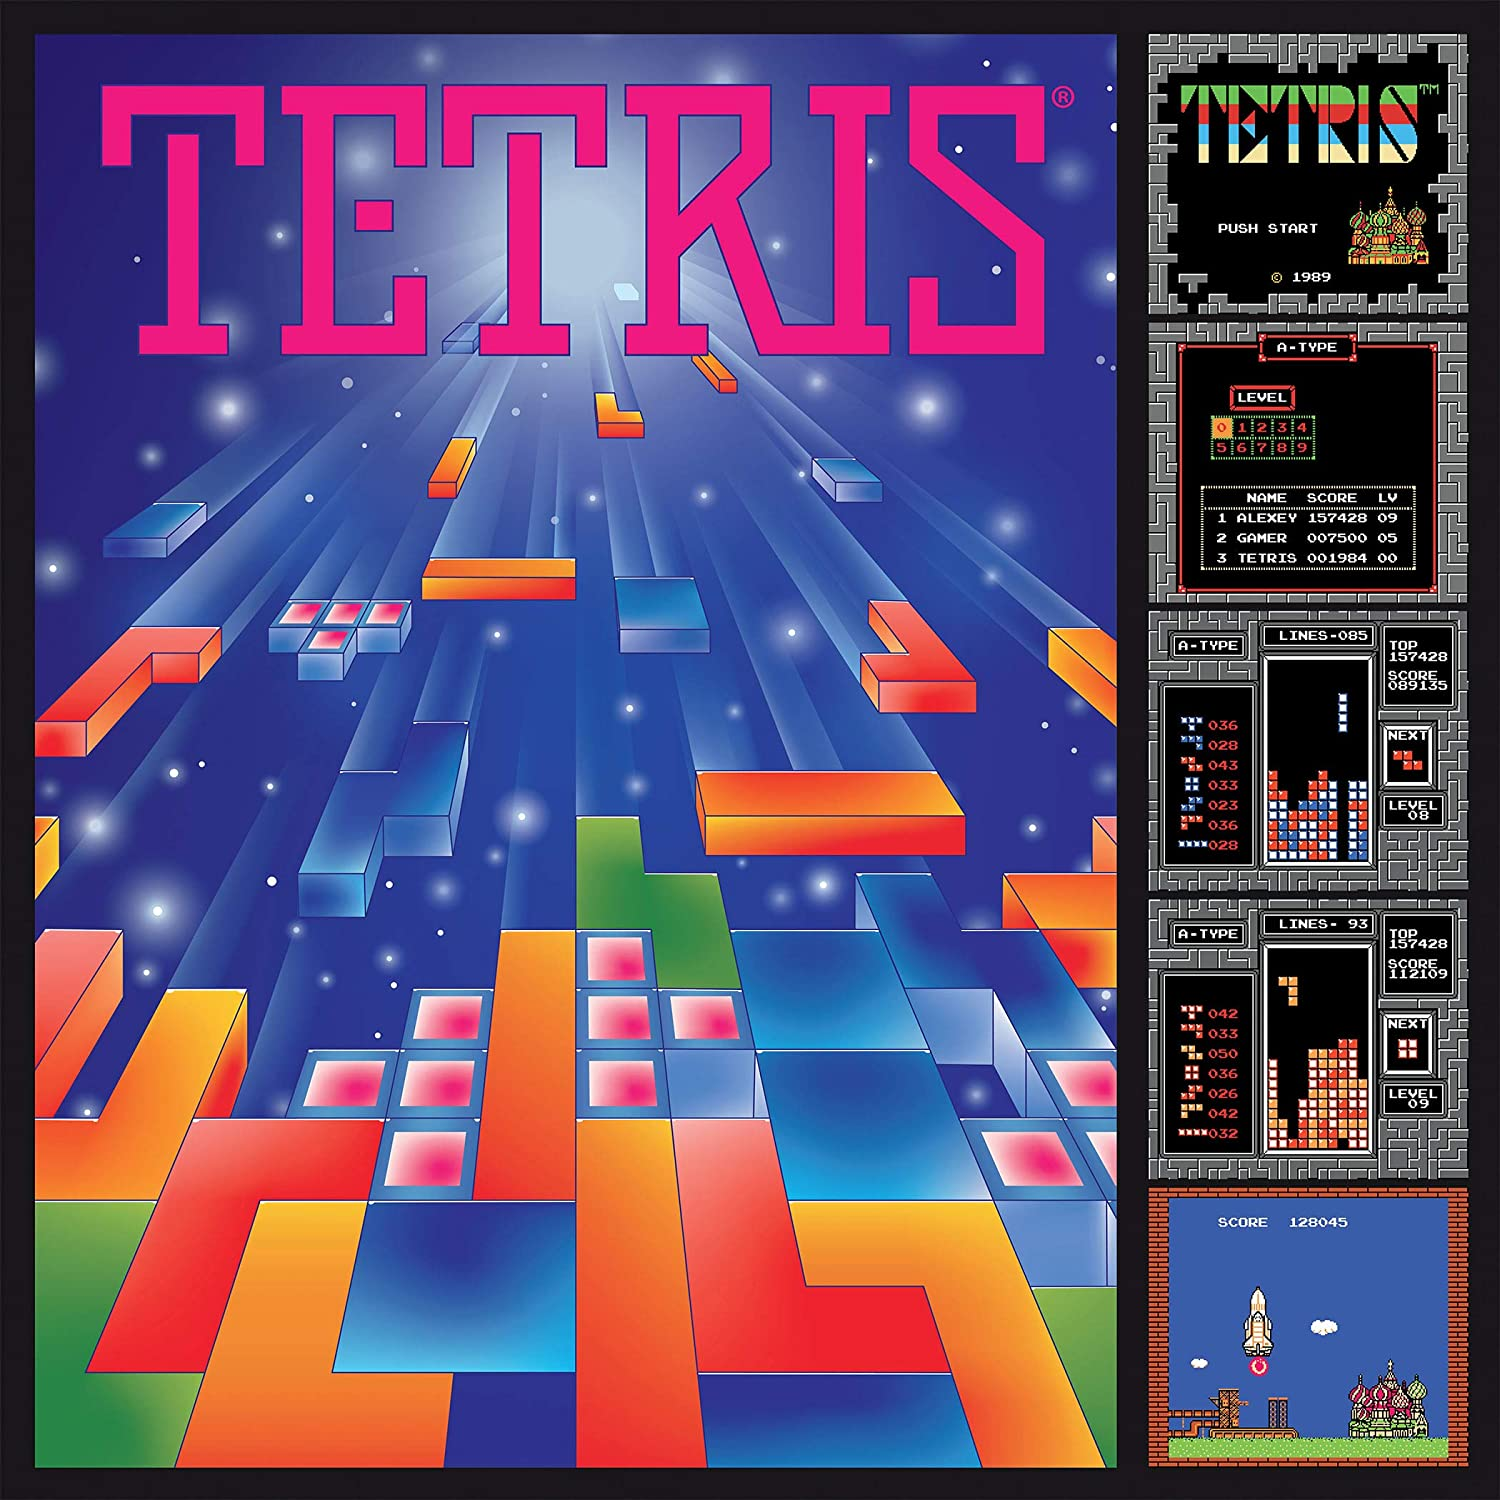 750 Piece Ceaco Tetris Gaming Poster Jigsaw Puzzle $9.60